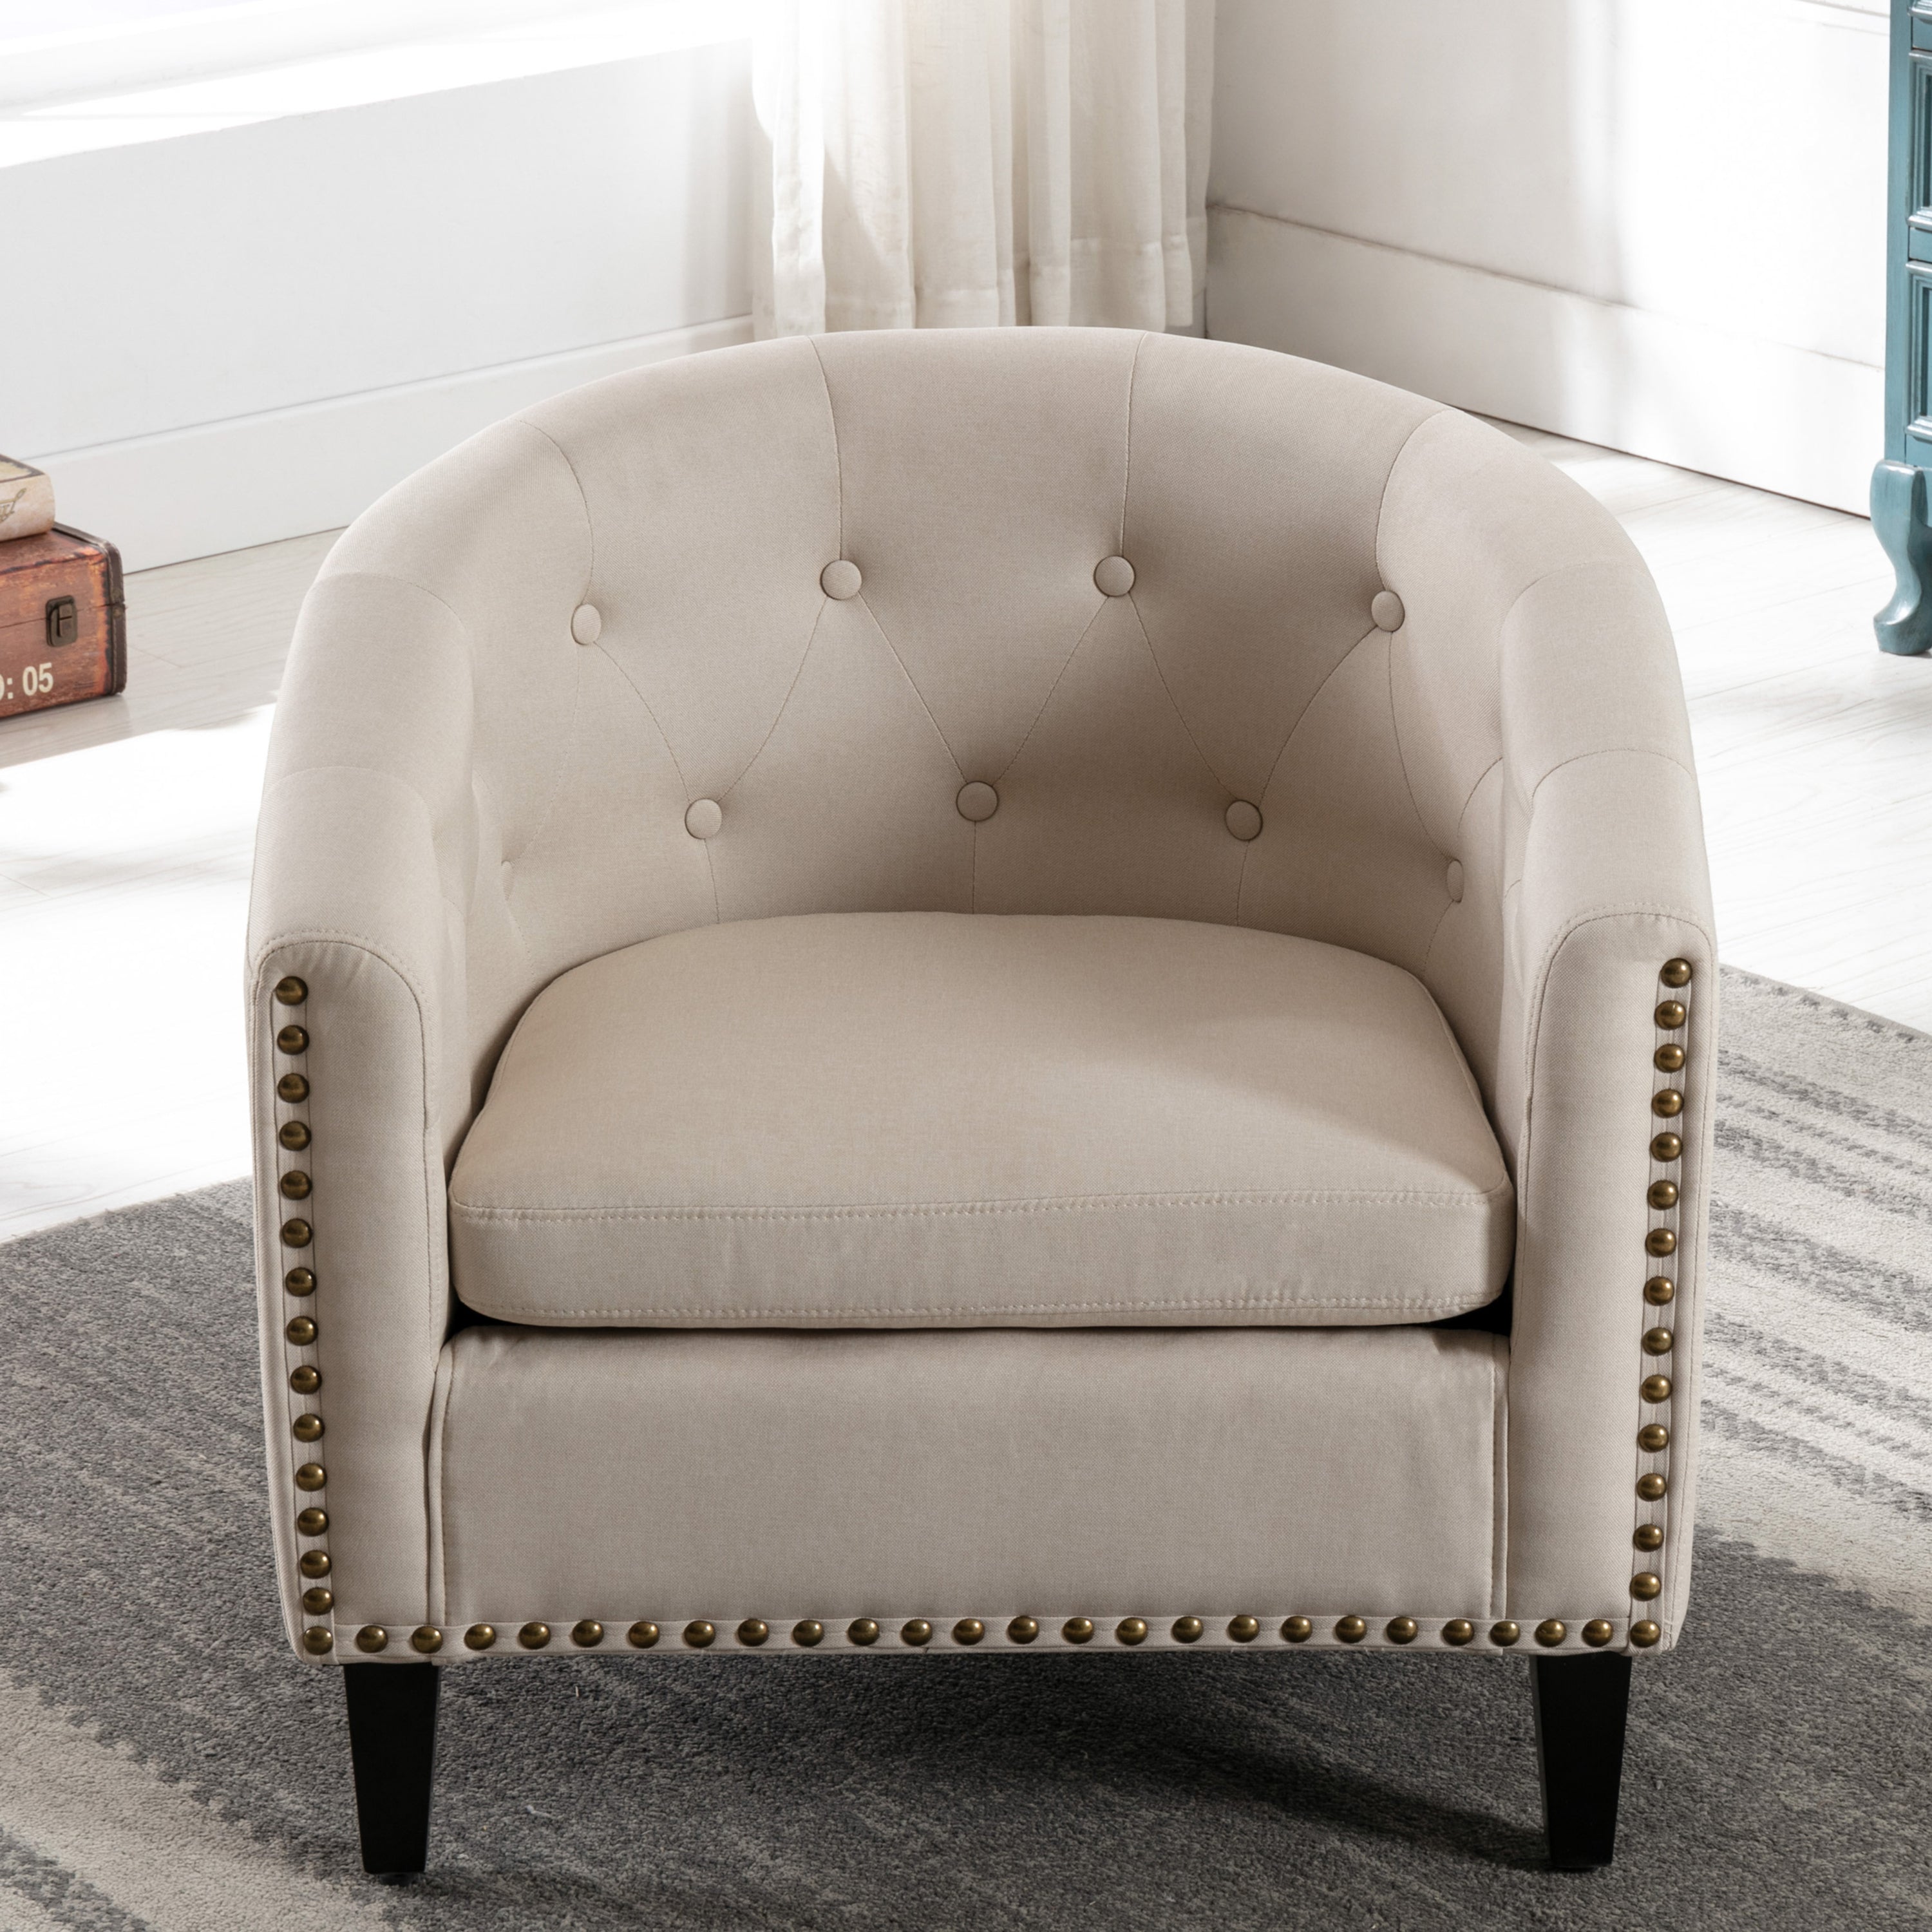 Tan linen Fabric Tufted Barrel Accent Chair with Nailhead Trim